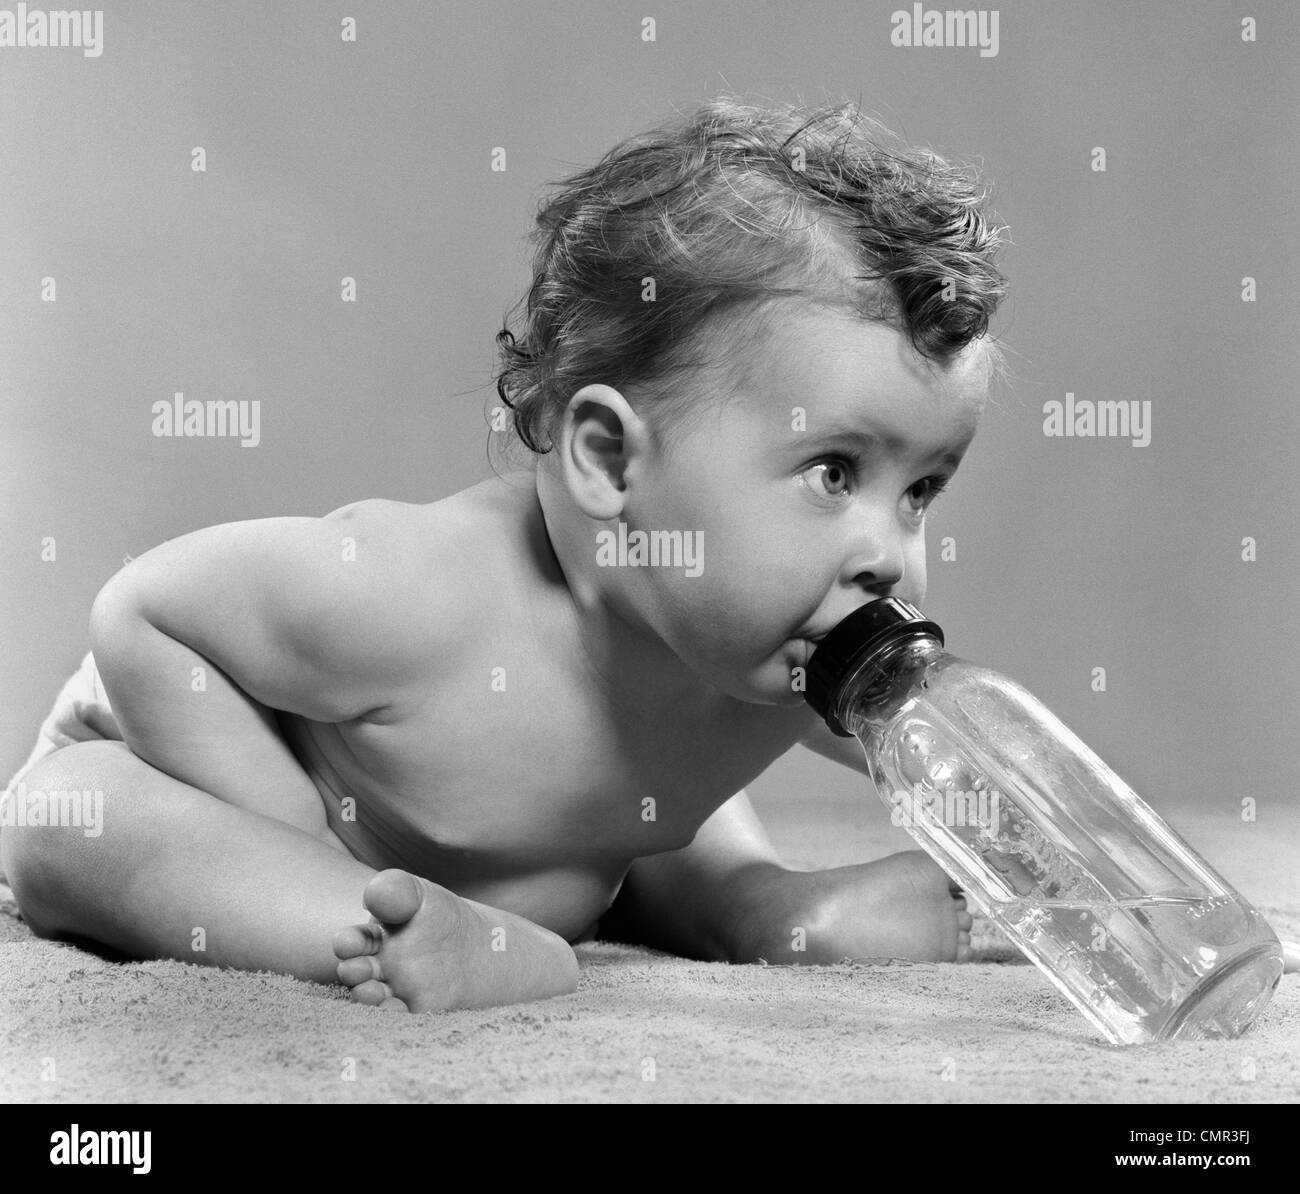 1950s BABY SITTING LEANING FORWARD DRINKING FROM BOTTLE STUDIO INDOOR Stock Photo